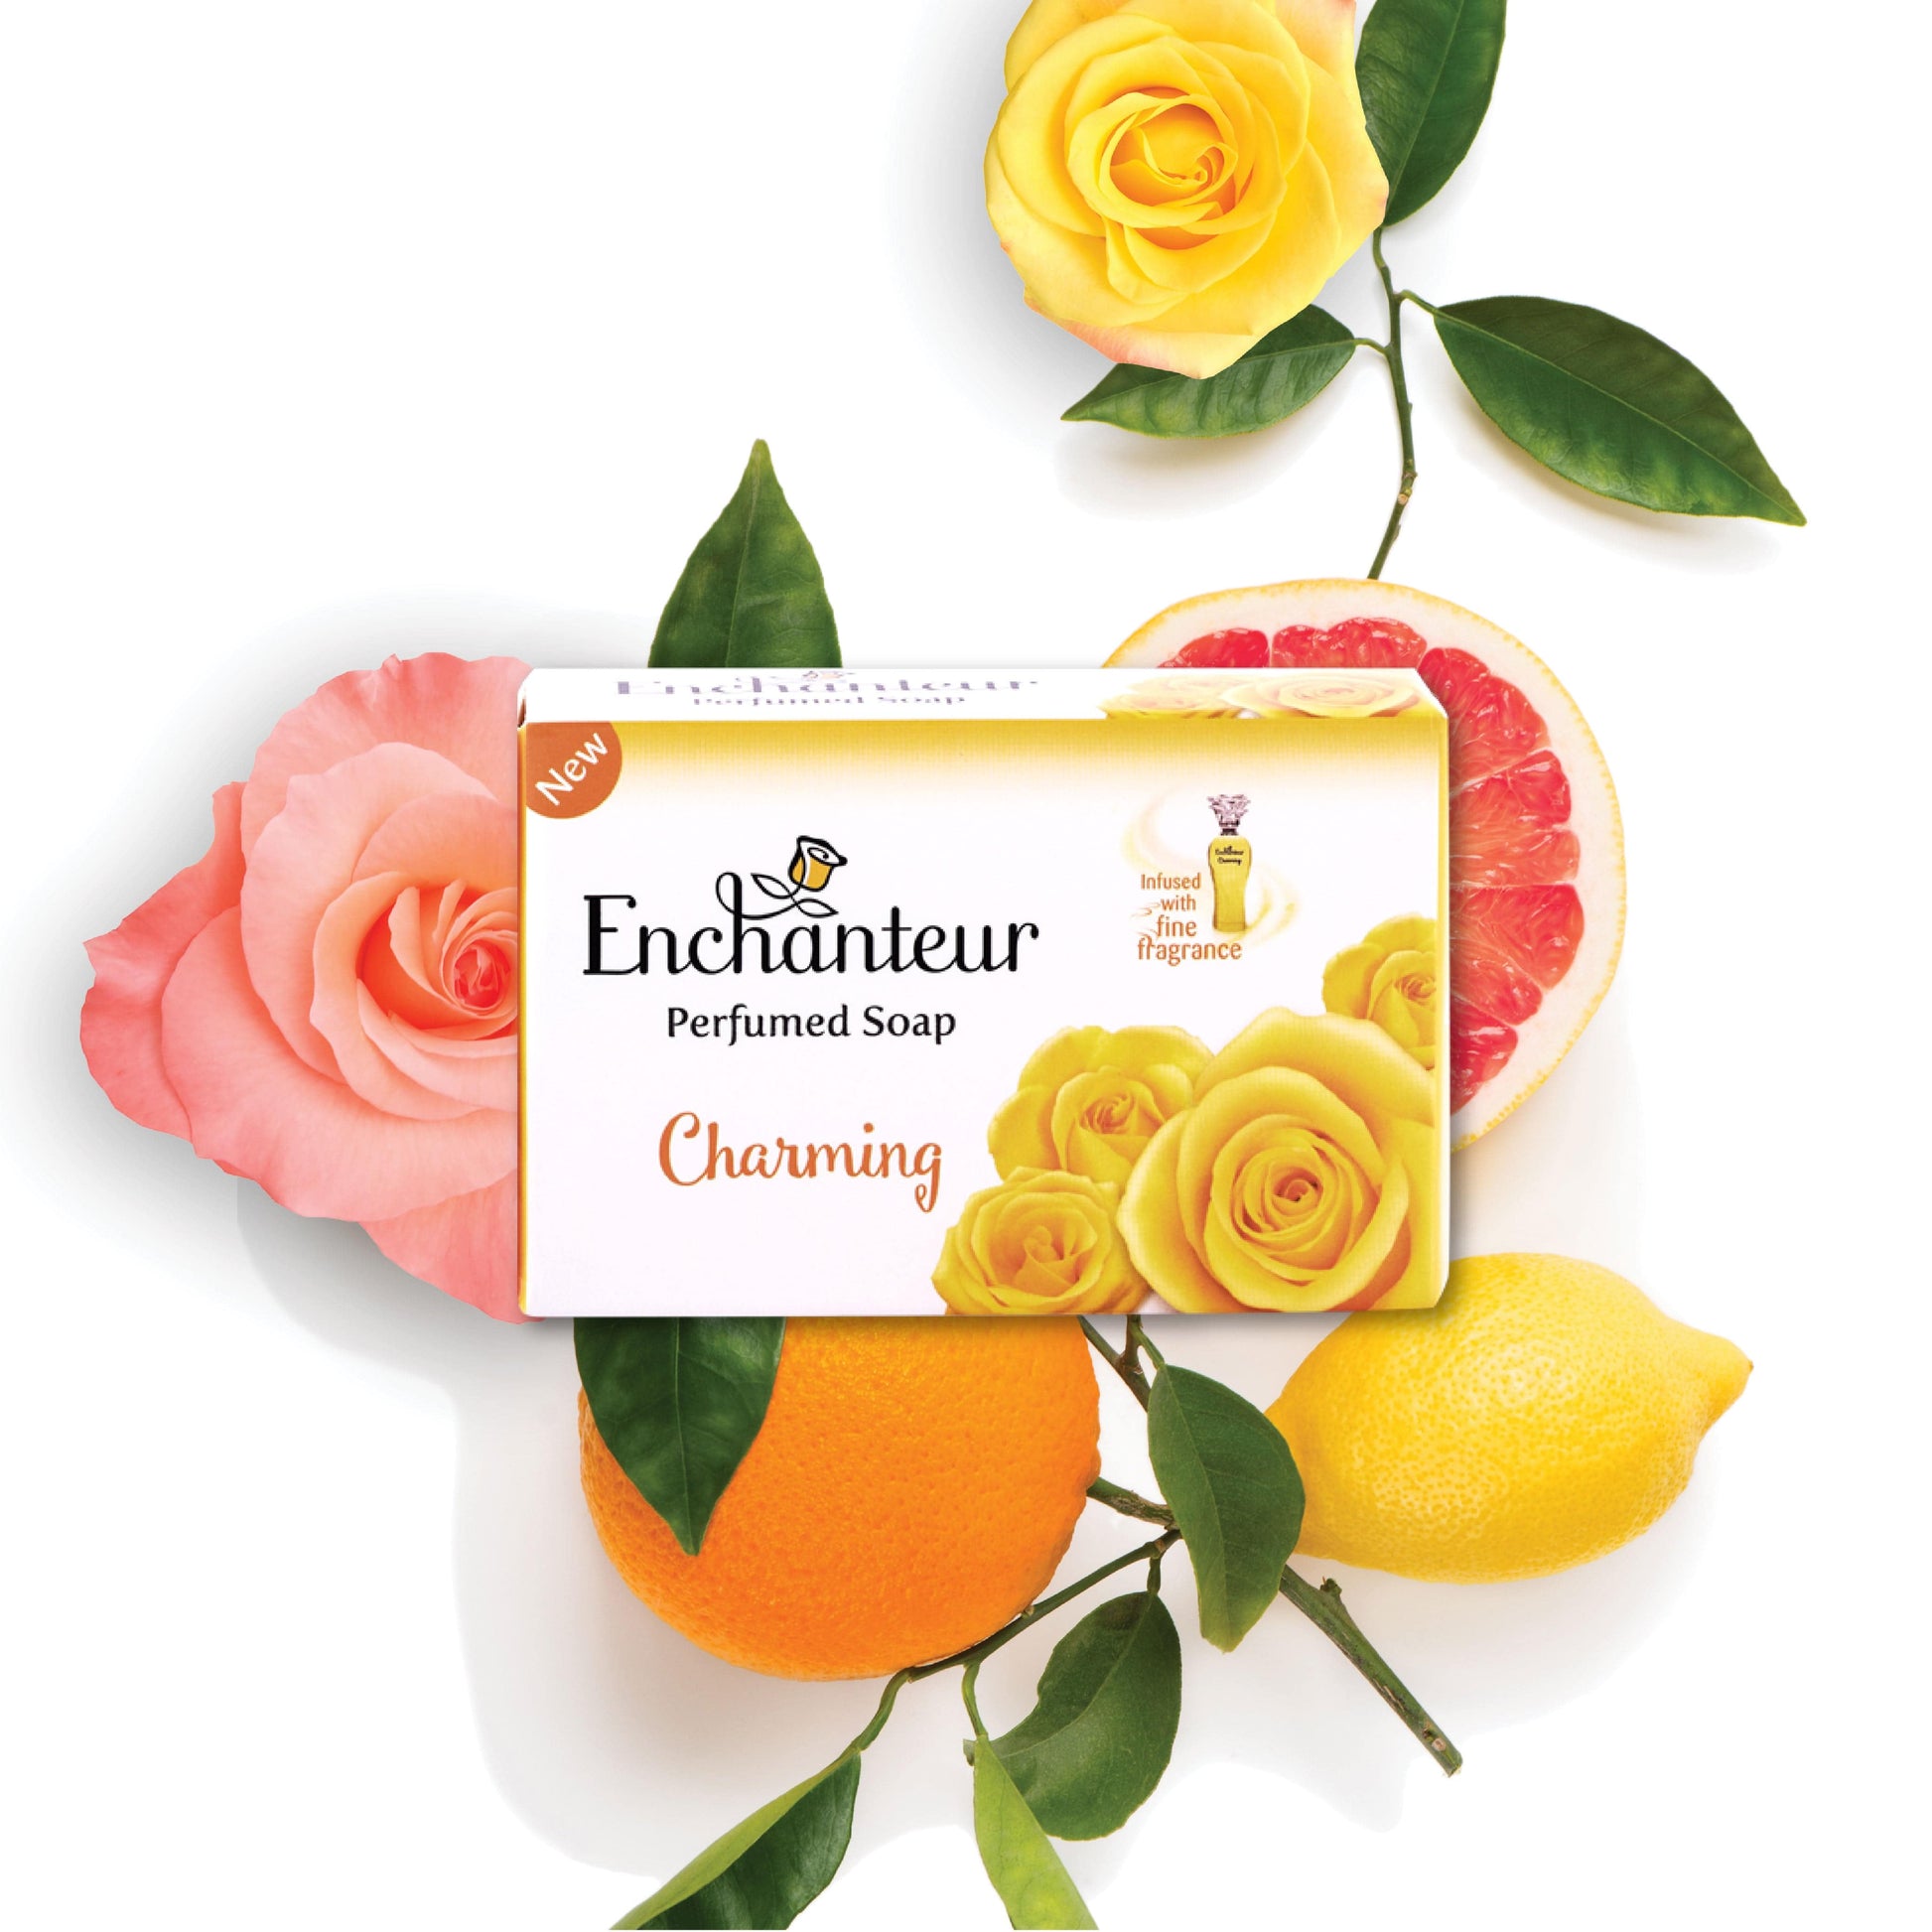 Enchanteur Perfumed Charming Bathing Soap Bar, Pack of 3+1 at Online Store India